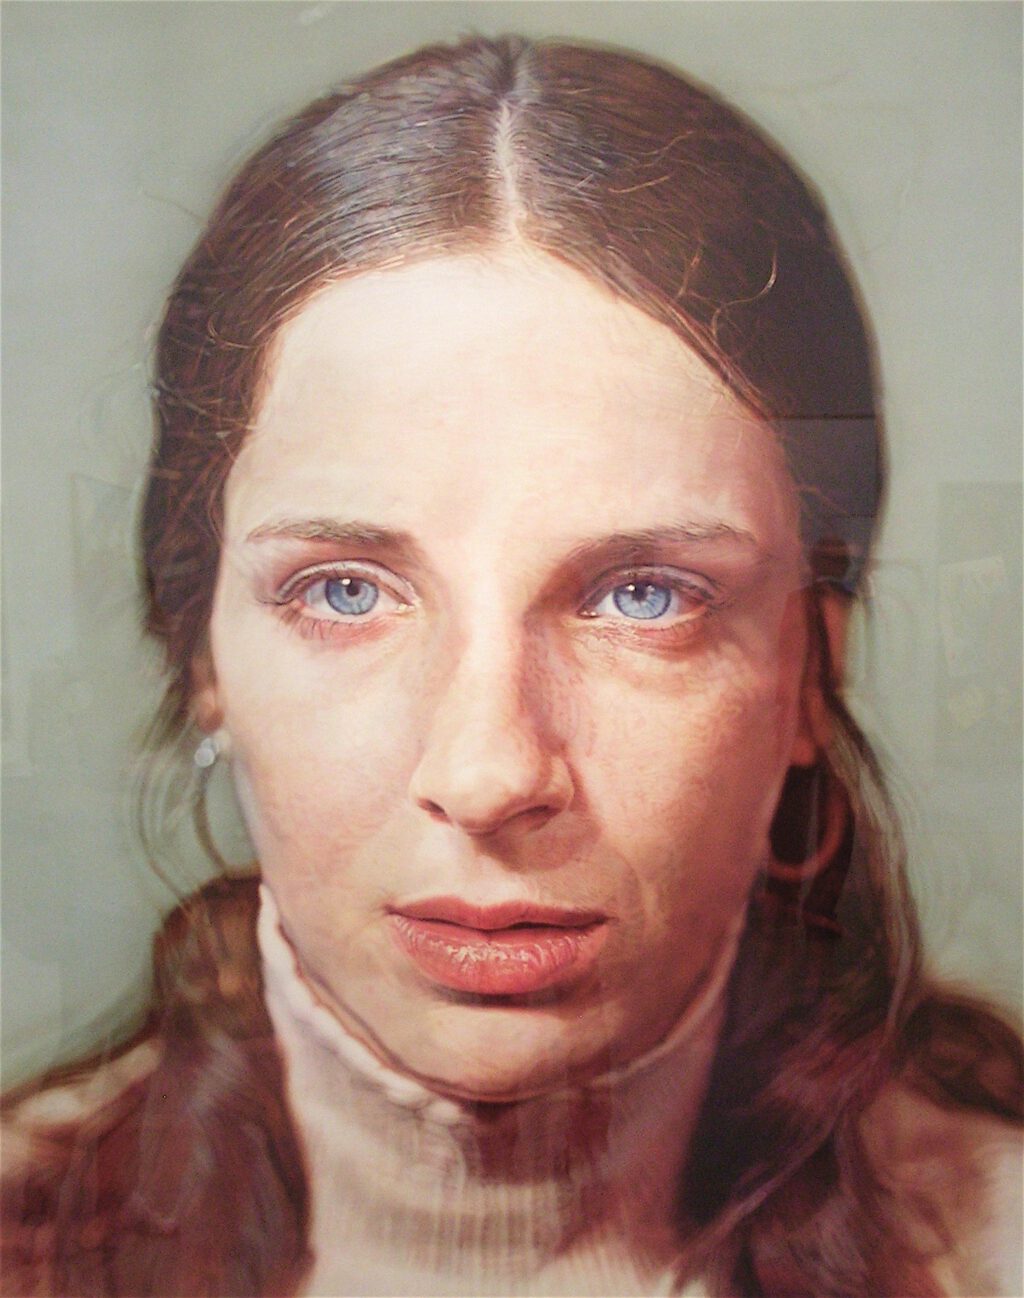 Chuck Close ‘Leslie’ 1972-1973 watercolor on paper mounted on canvas 184.2 x 144.8 cm @ “picturing america” Deutsche Guggenheim Berlin 2009. Picture taken by Mario A, 2009